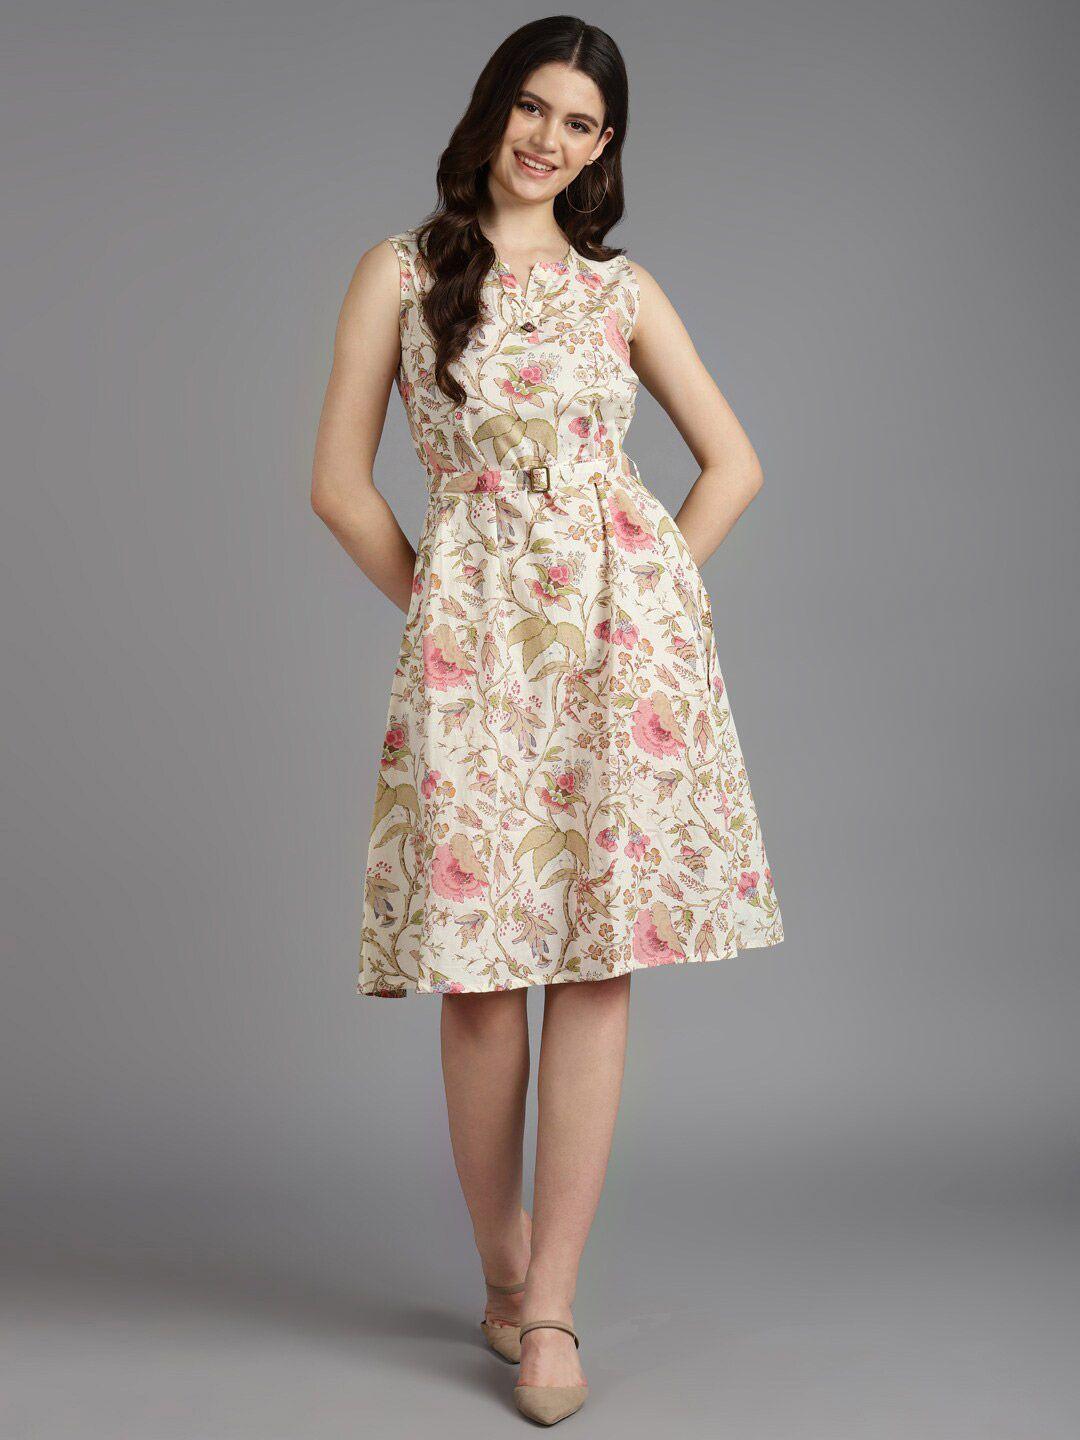 ZARI Floral Printed Round Neck Sleeveless Cotton Casual A-Line Dress